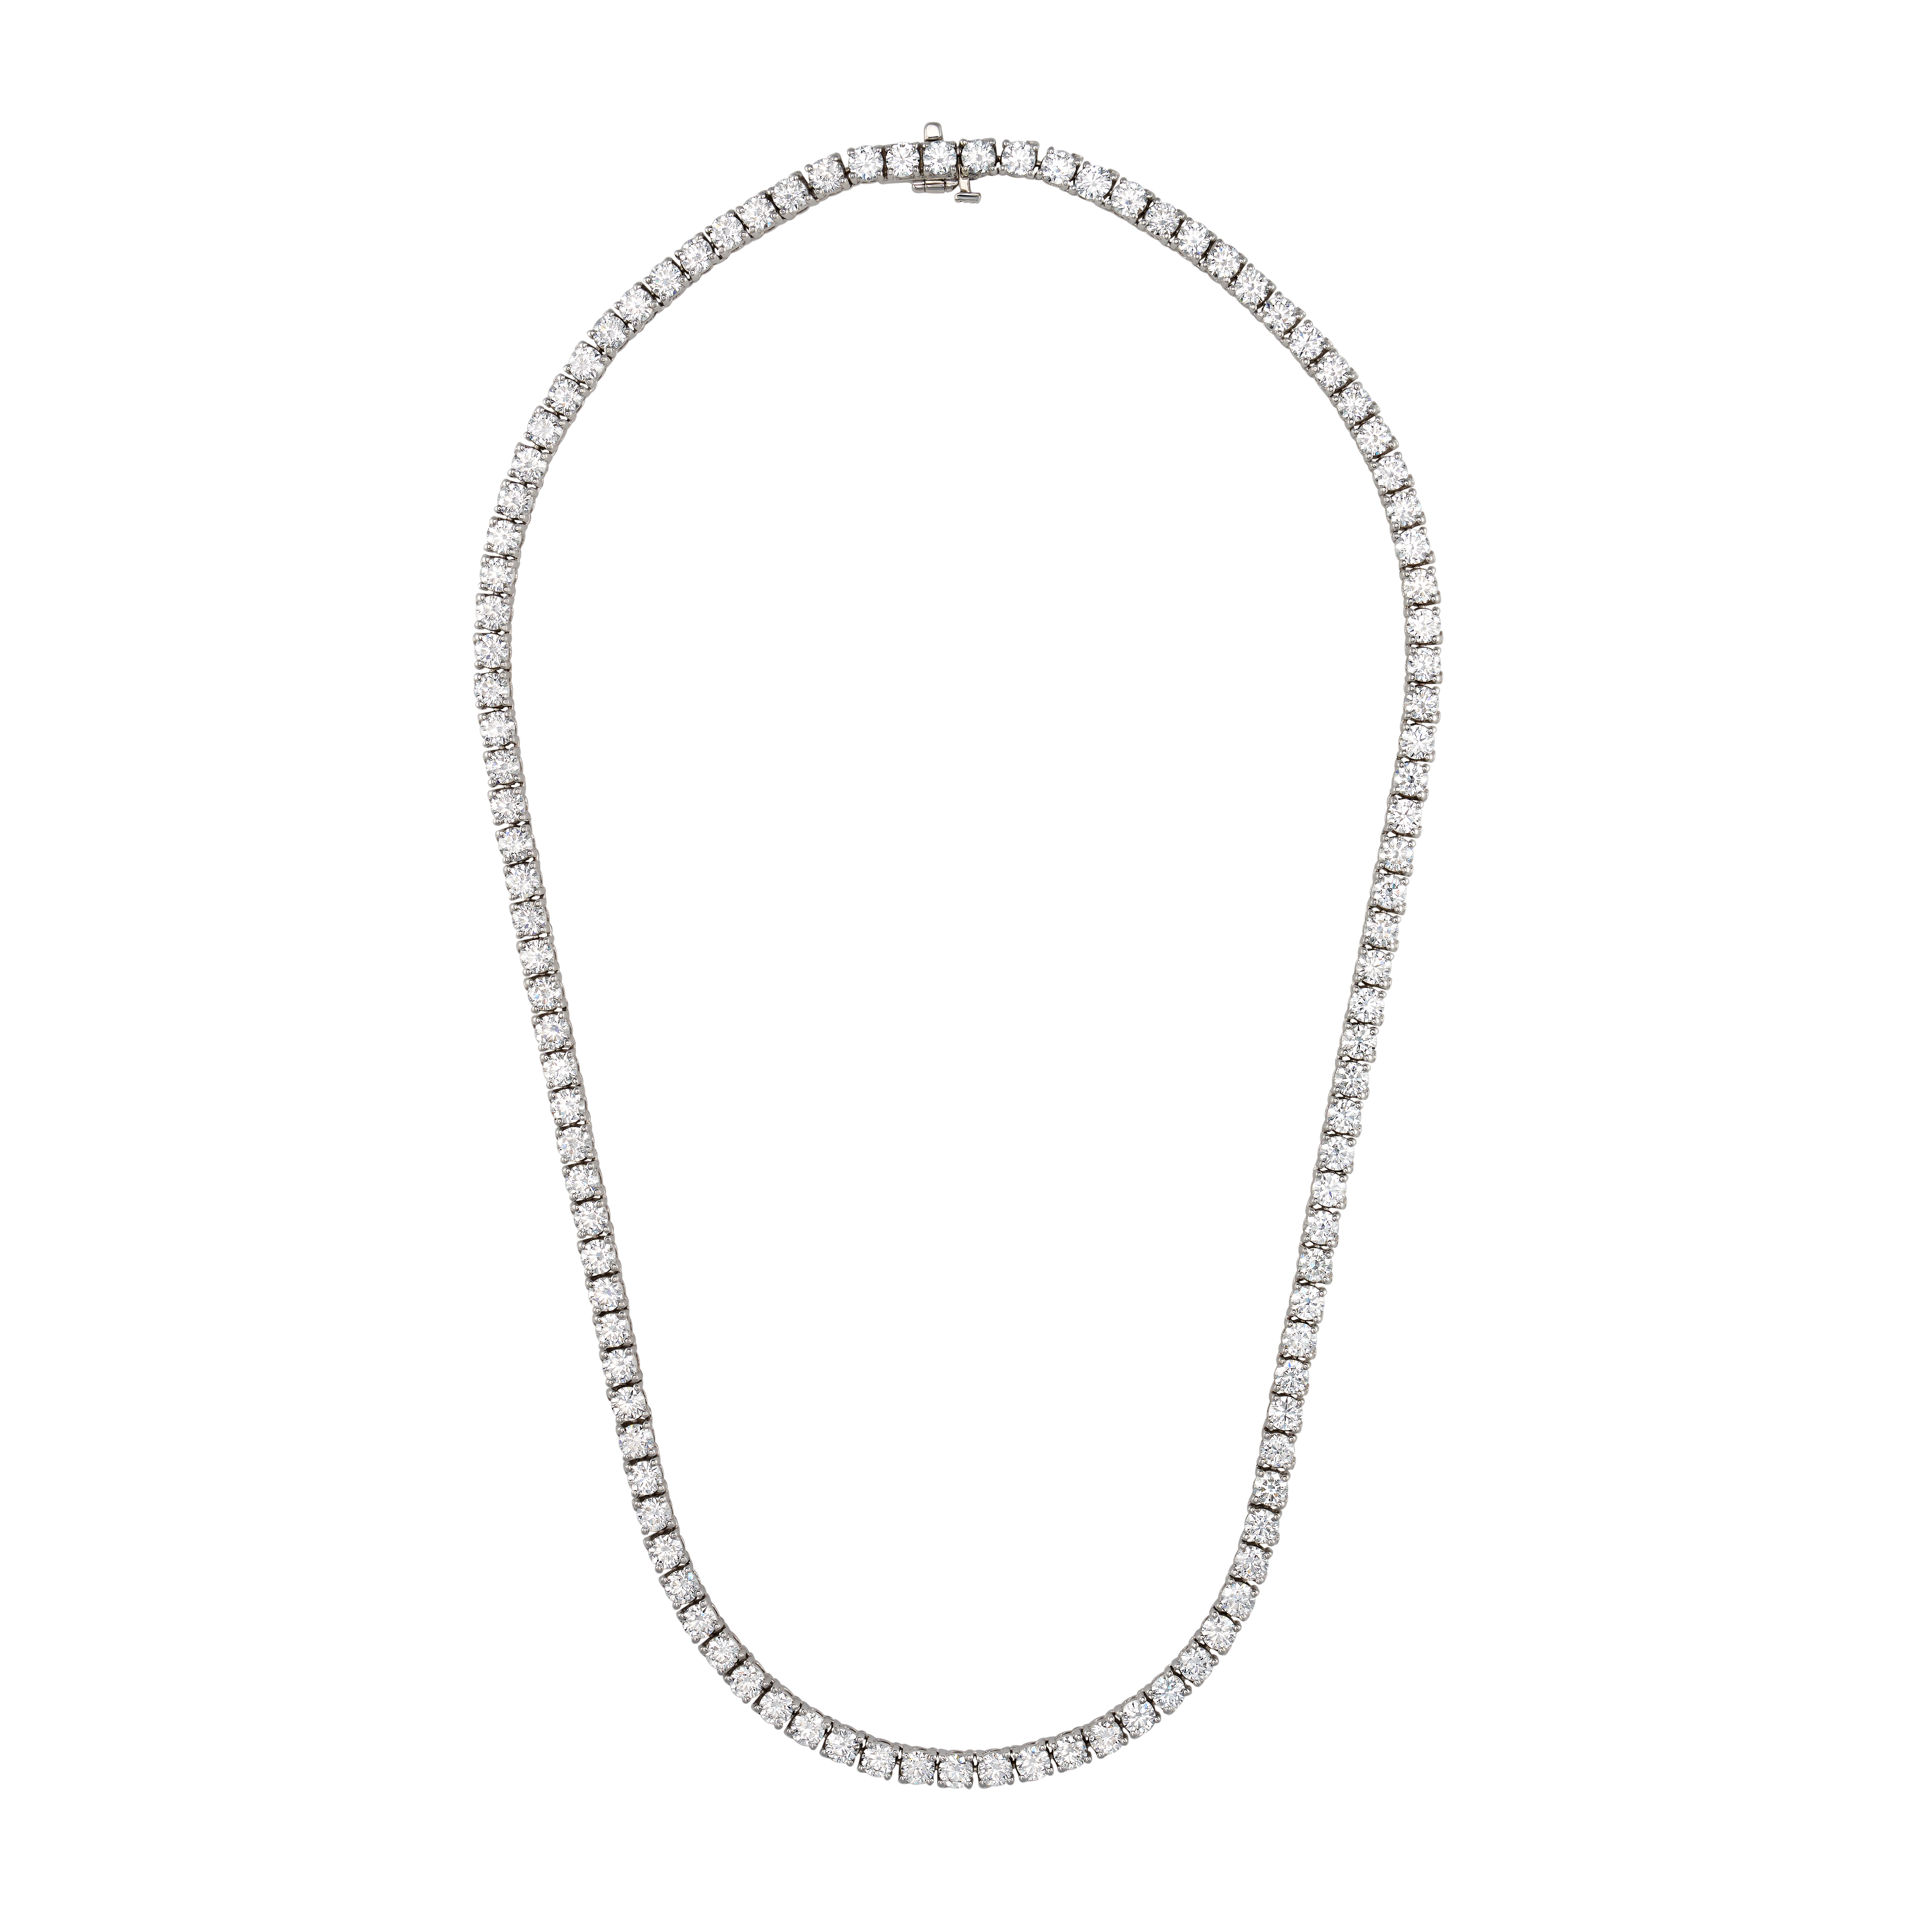 Classic 4 Prong Tennis Necklace